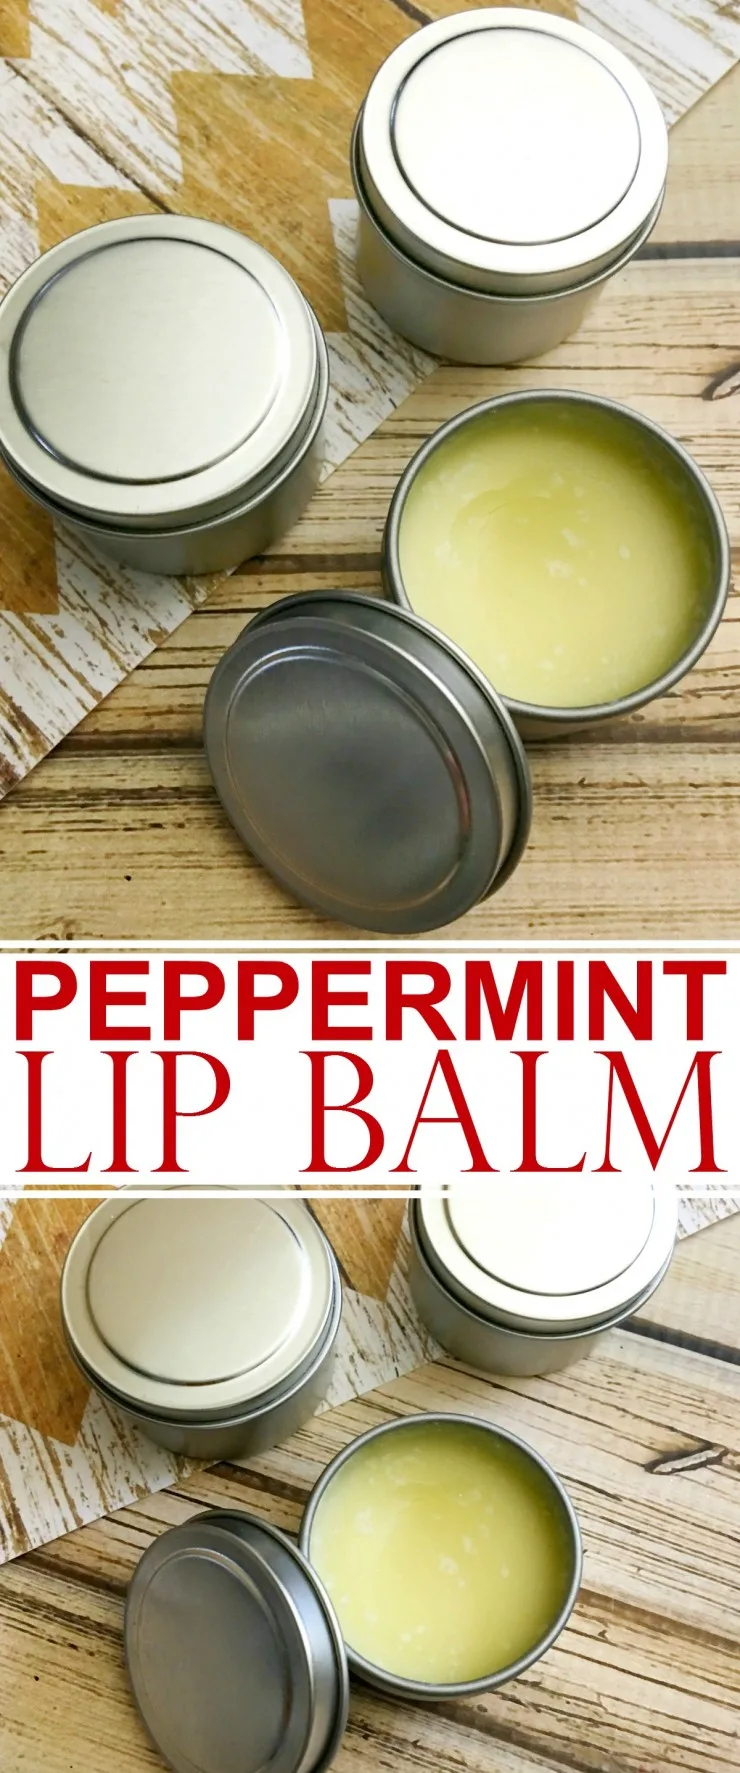 This DIY Peppermint Lip Balm is quick & easy and full of nourishing ingredients for healthy looking lips. This is a great homemade gift or diy stocking stuffer!